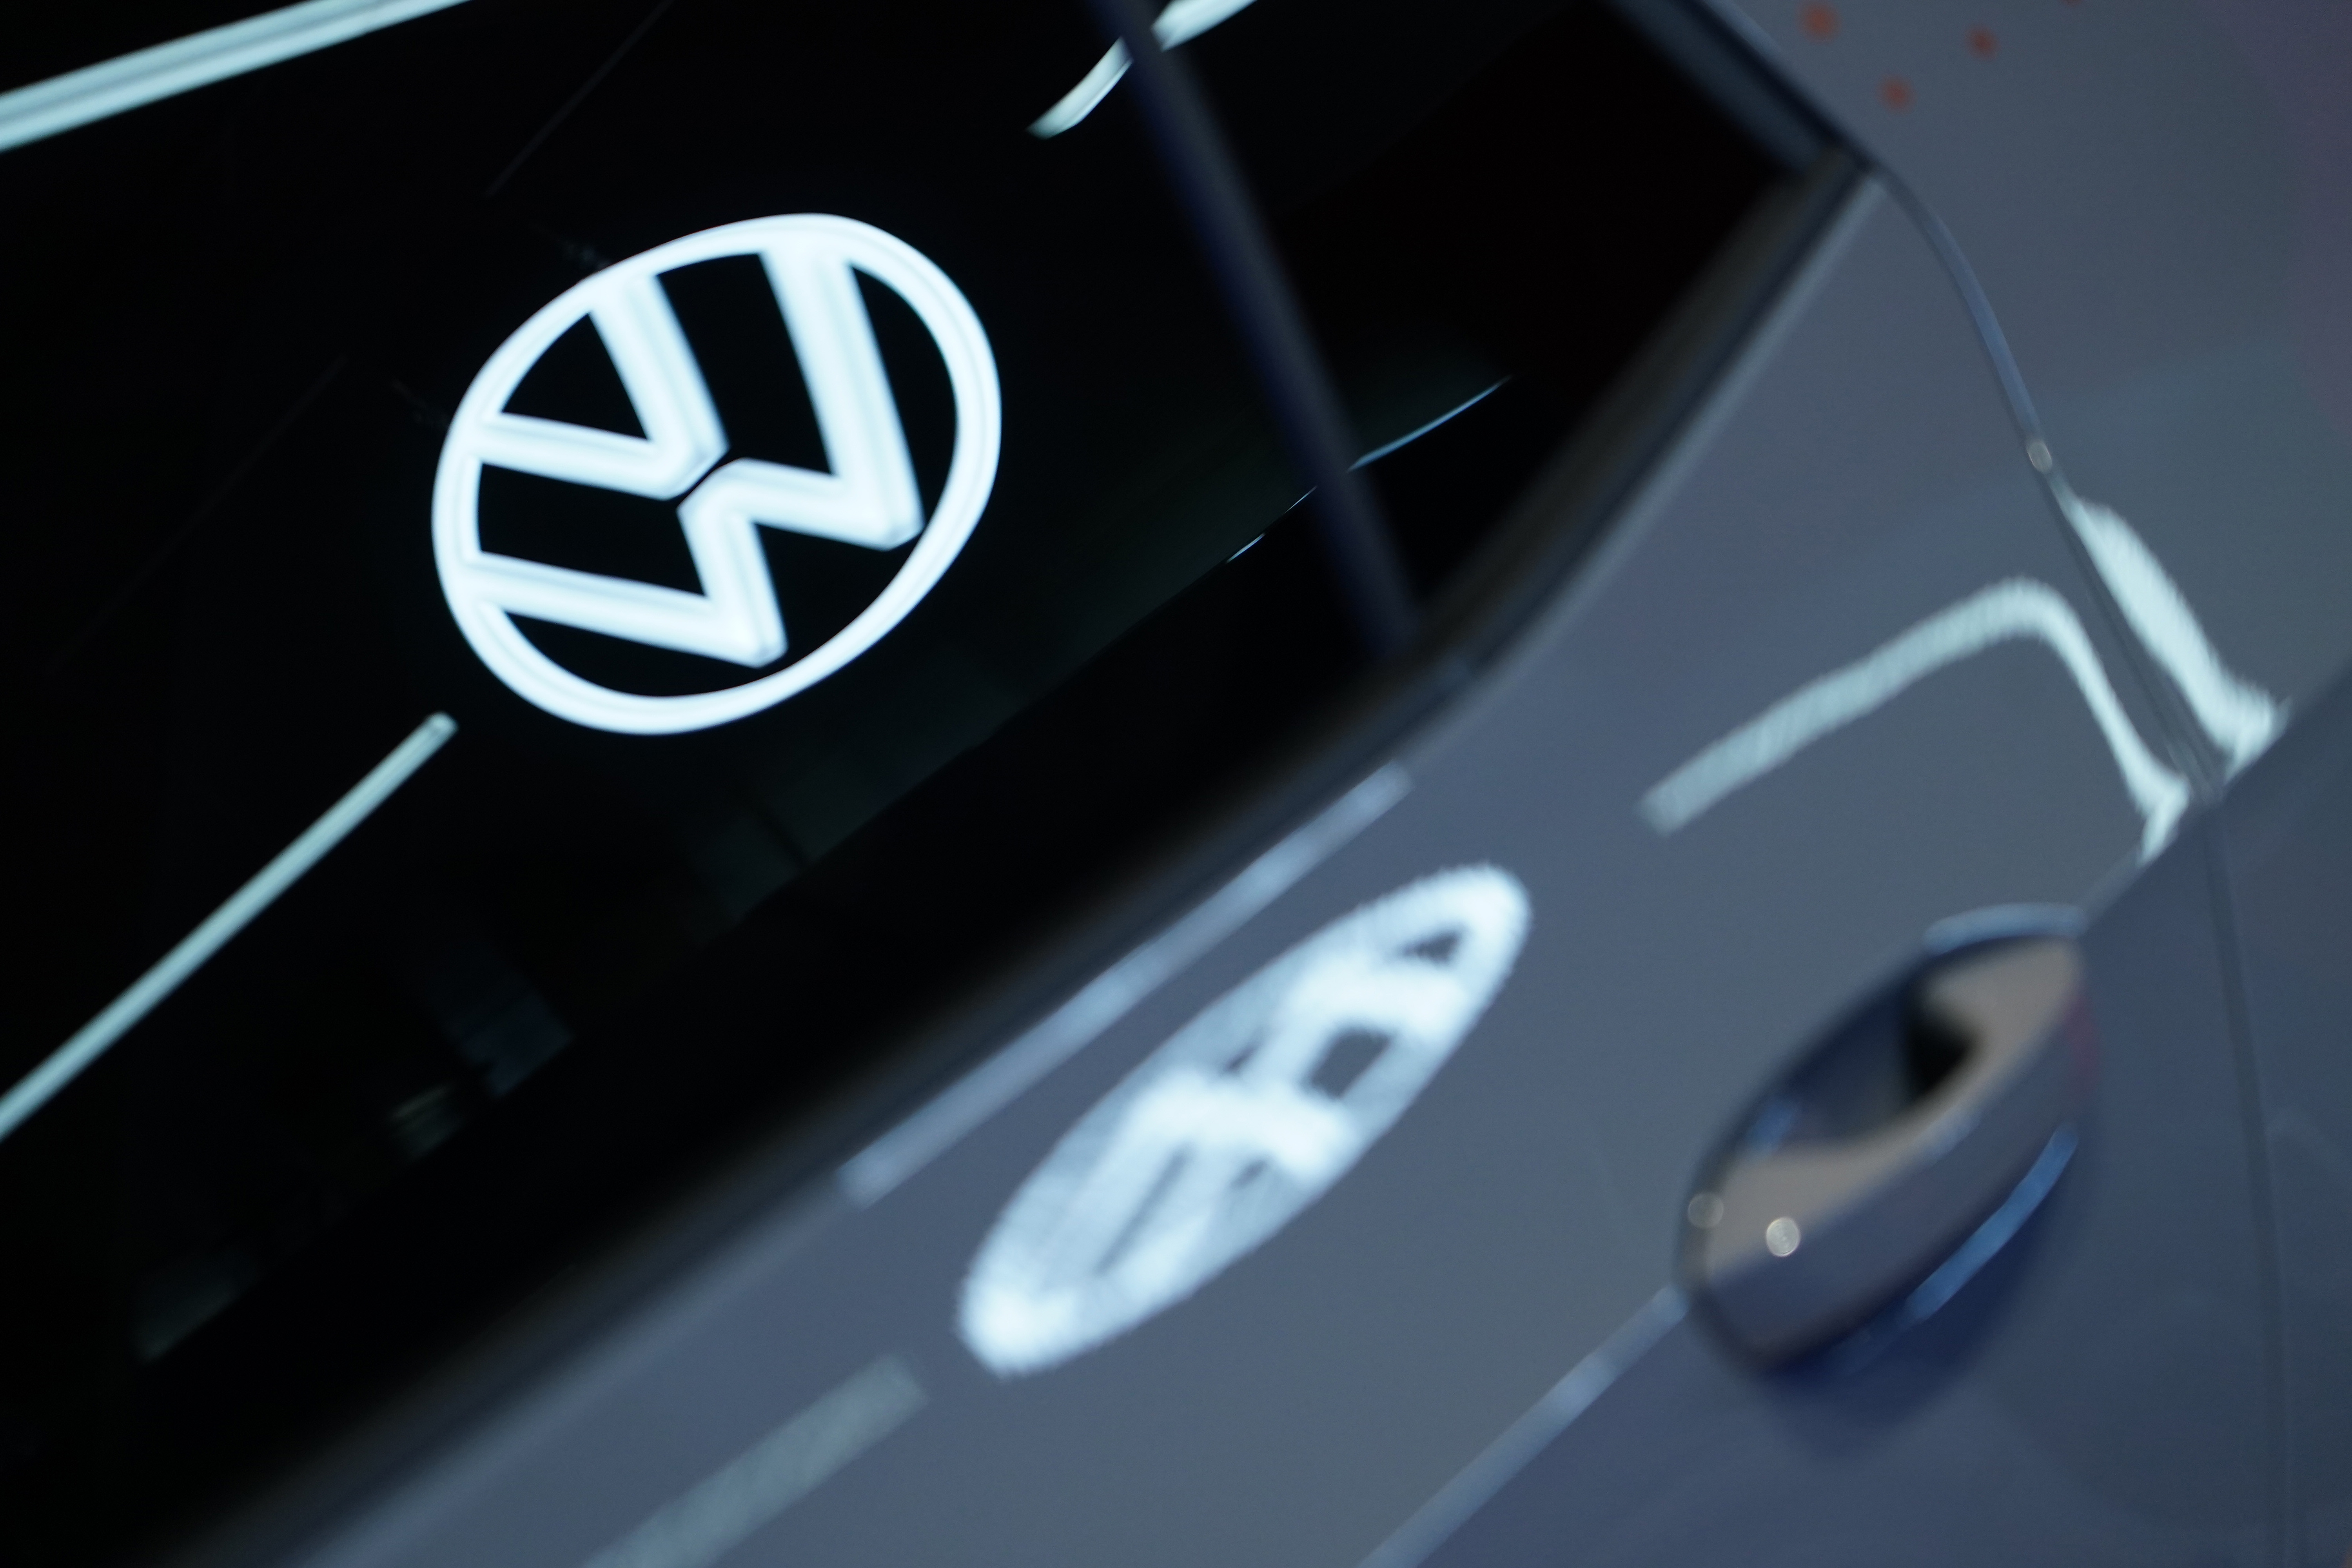 China’s Xpeng and Volkswagen extend partnership to develop two B-class battery EVs